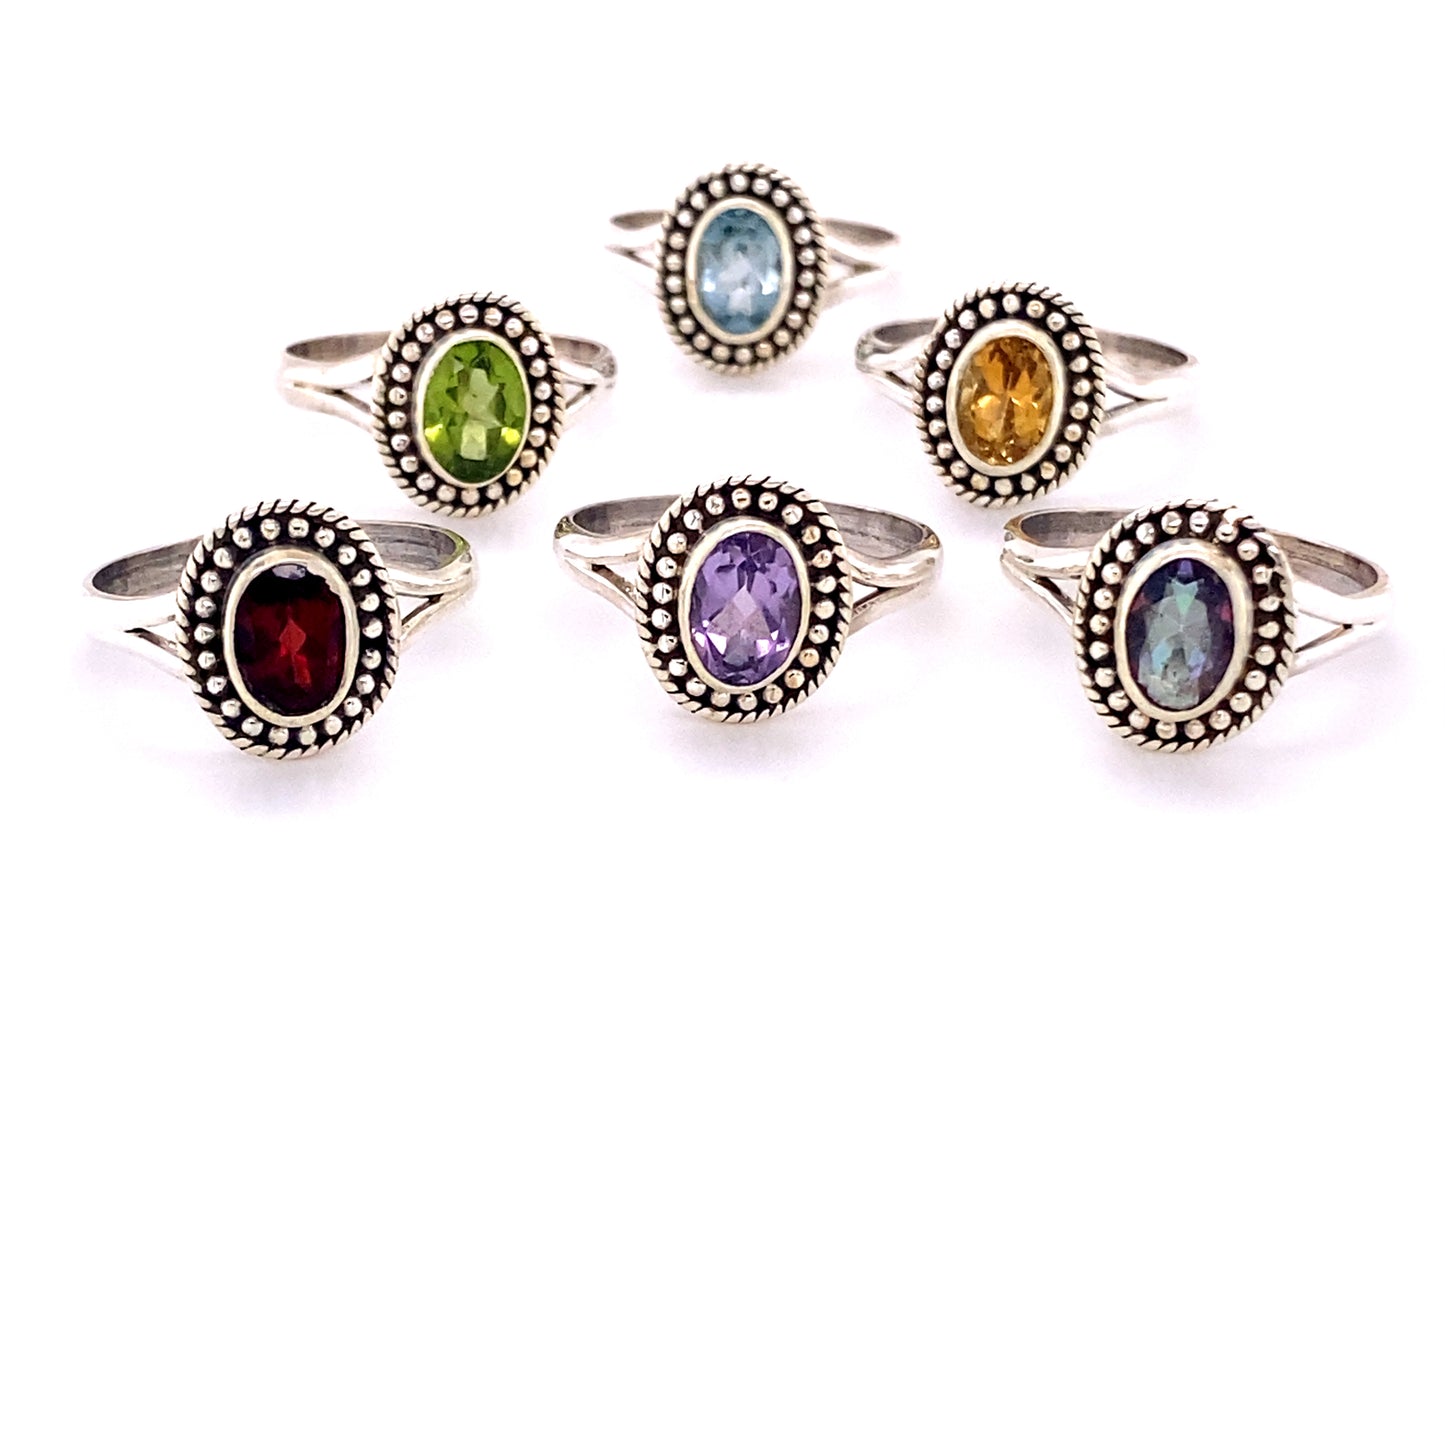 A set of Oval Gemstone Rings with Ball Disk Rope Border.